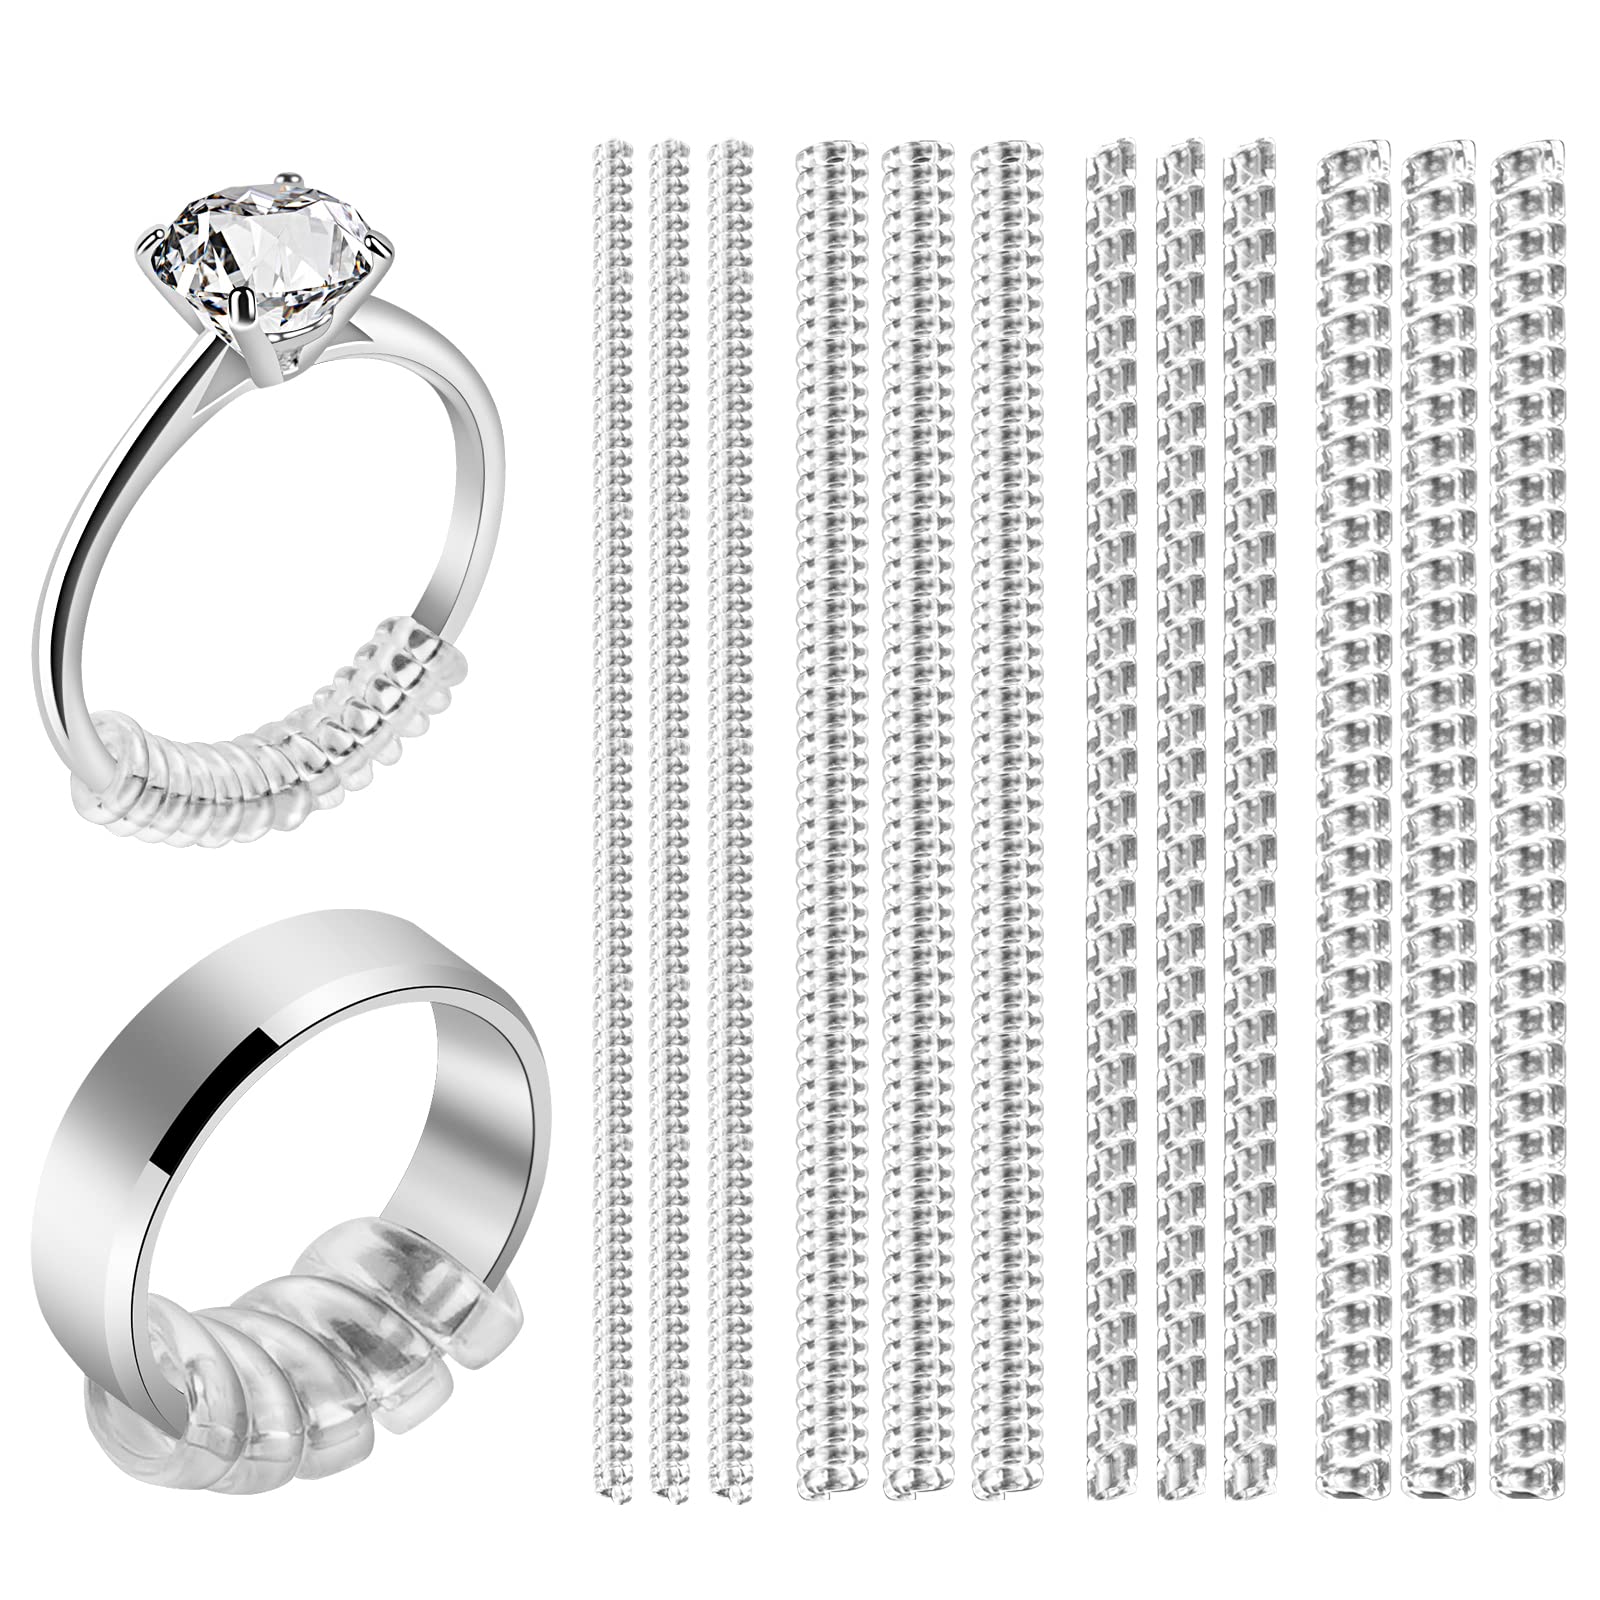  Ring Sizer Adjuster for Loose Rings - 12 Pack, 2 Sizes for  Different Band Widths – Silicone Ring Size Adjuster - Invisible Ring Guards  for Women and Men by 5 STARS